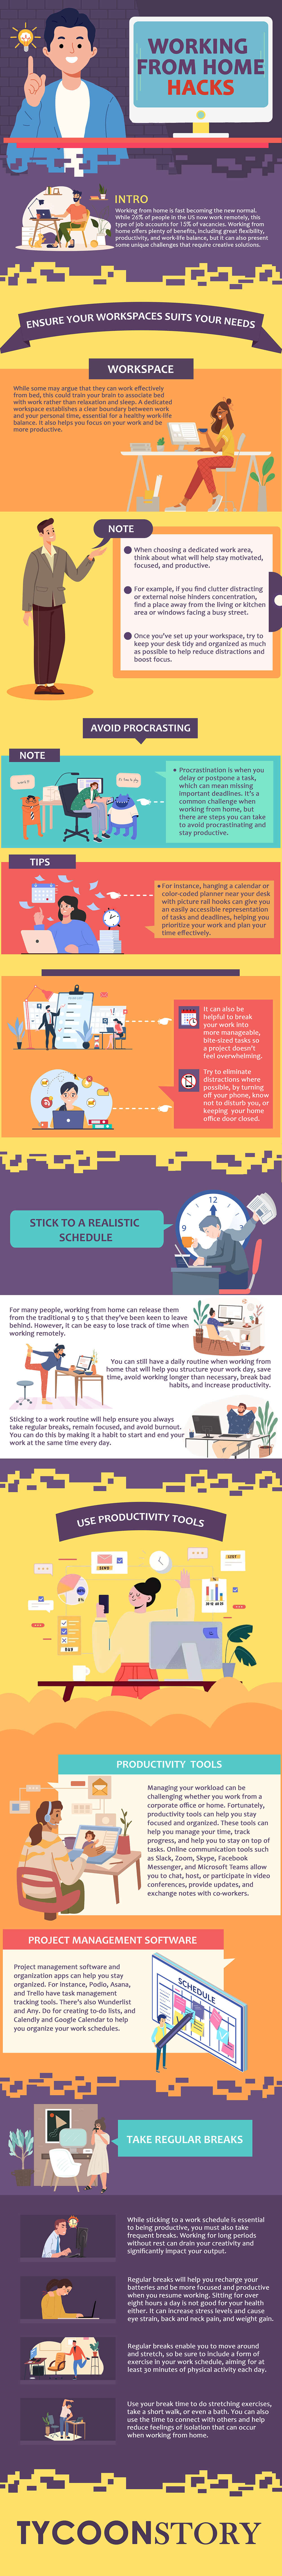 Working from home hacks